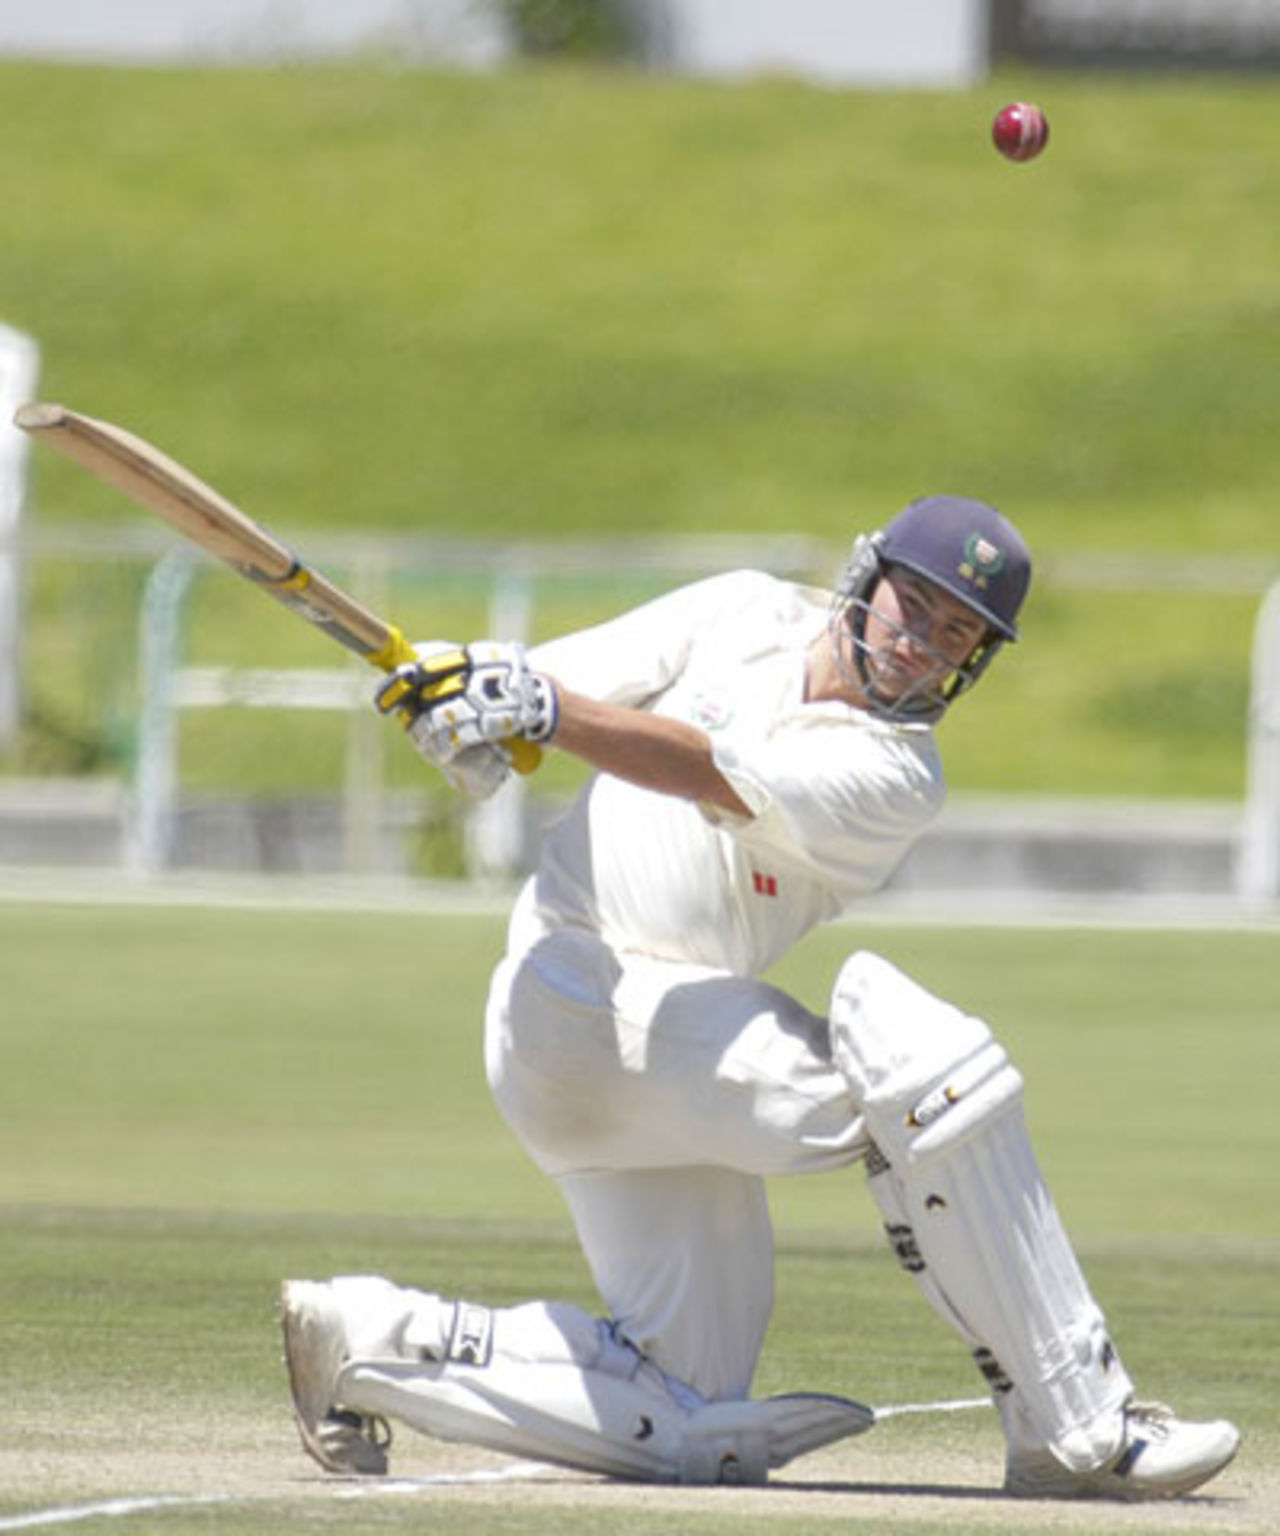 Derrin Bassage hit the winning runs against NW as WP cruised to a 10 wicket win at Newlands